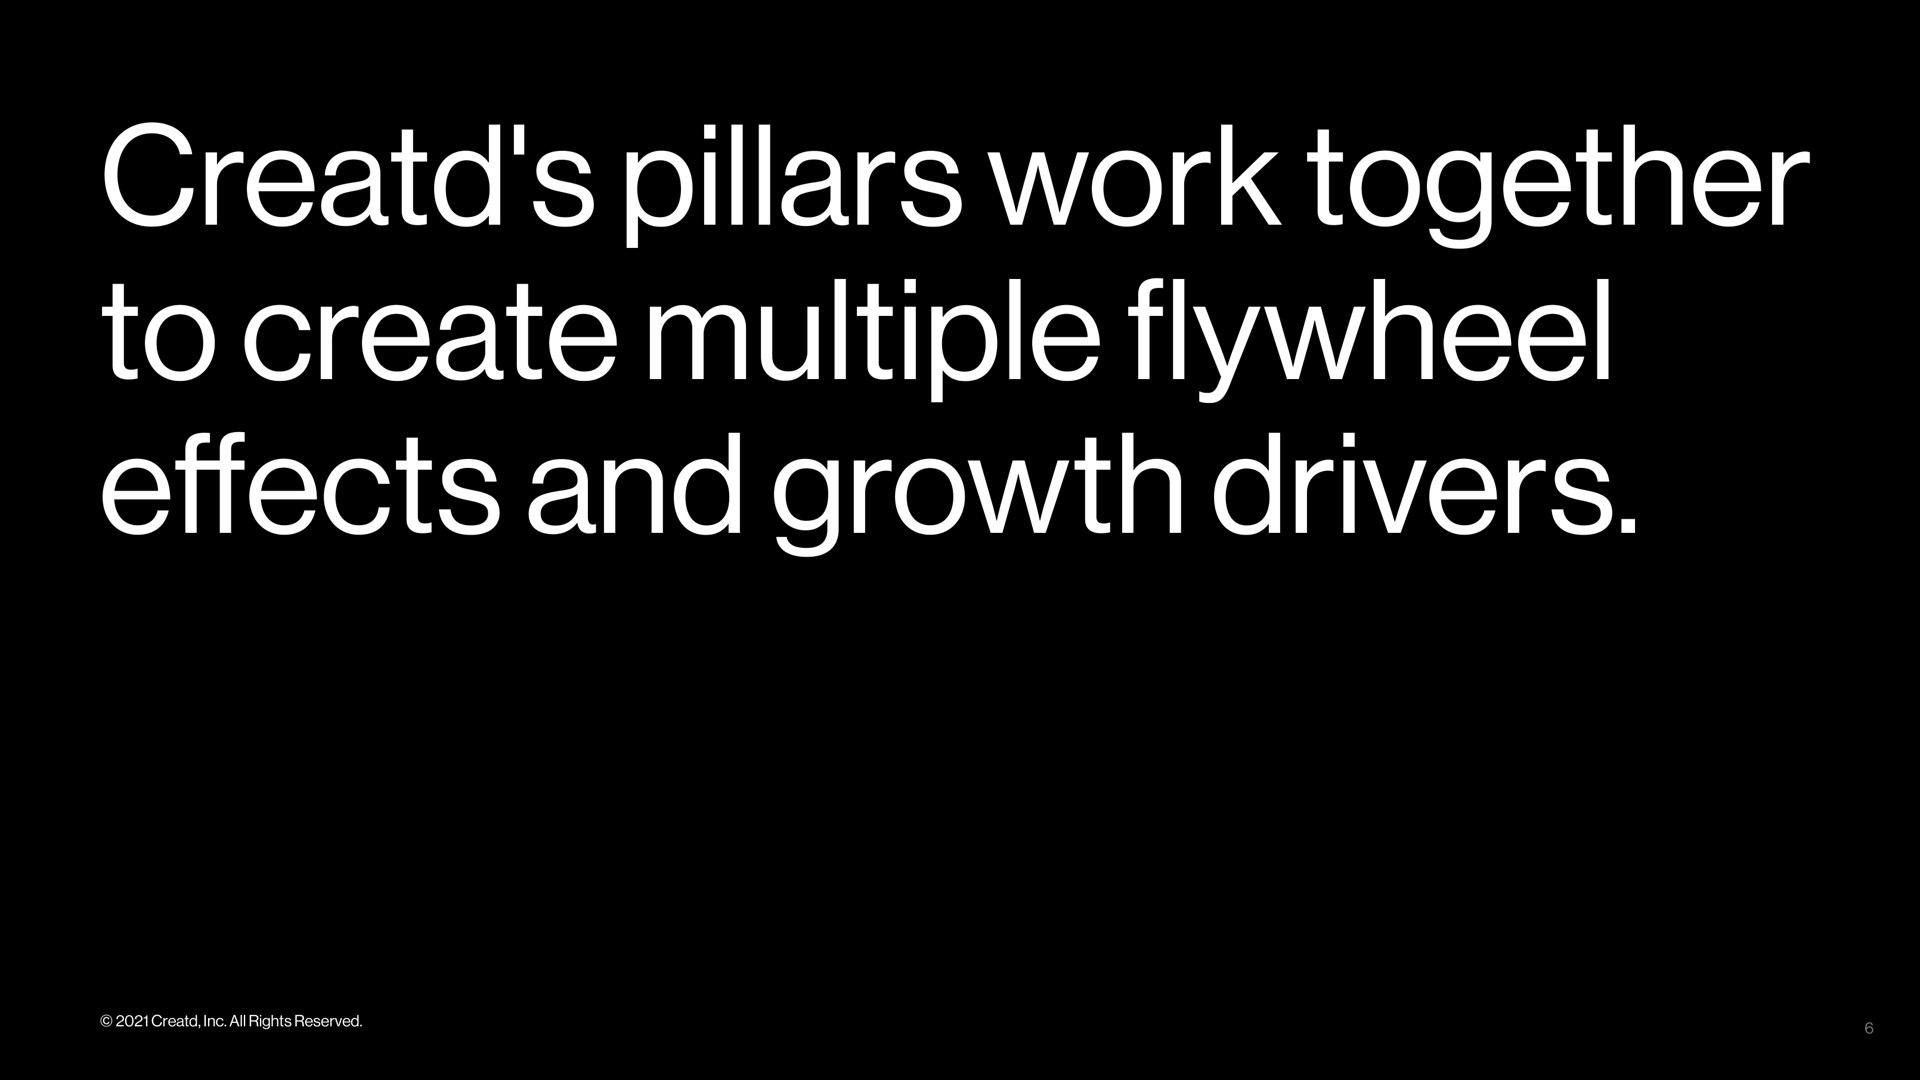 pillars work together to create multiple and growth drivers flywheel effects | Creatd